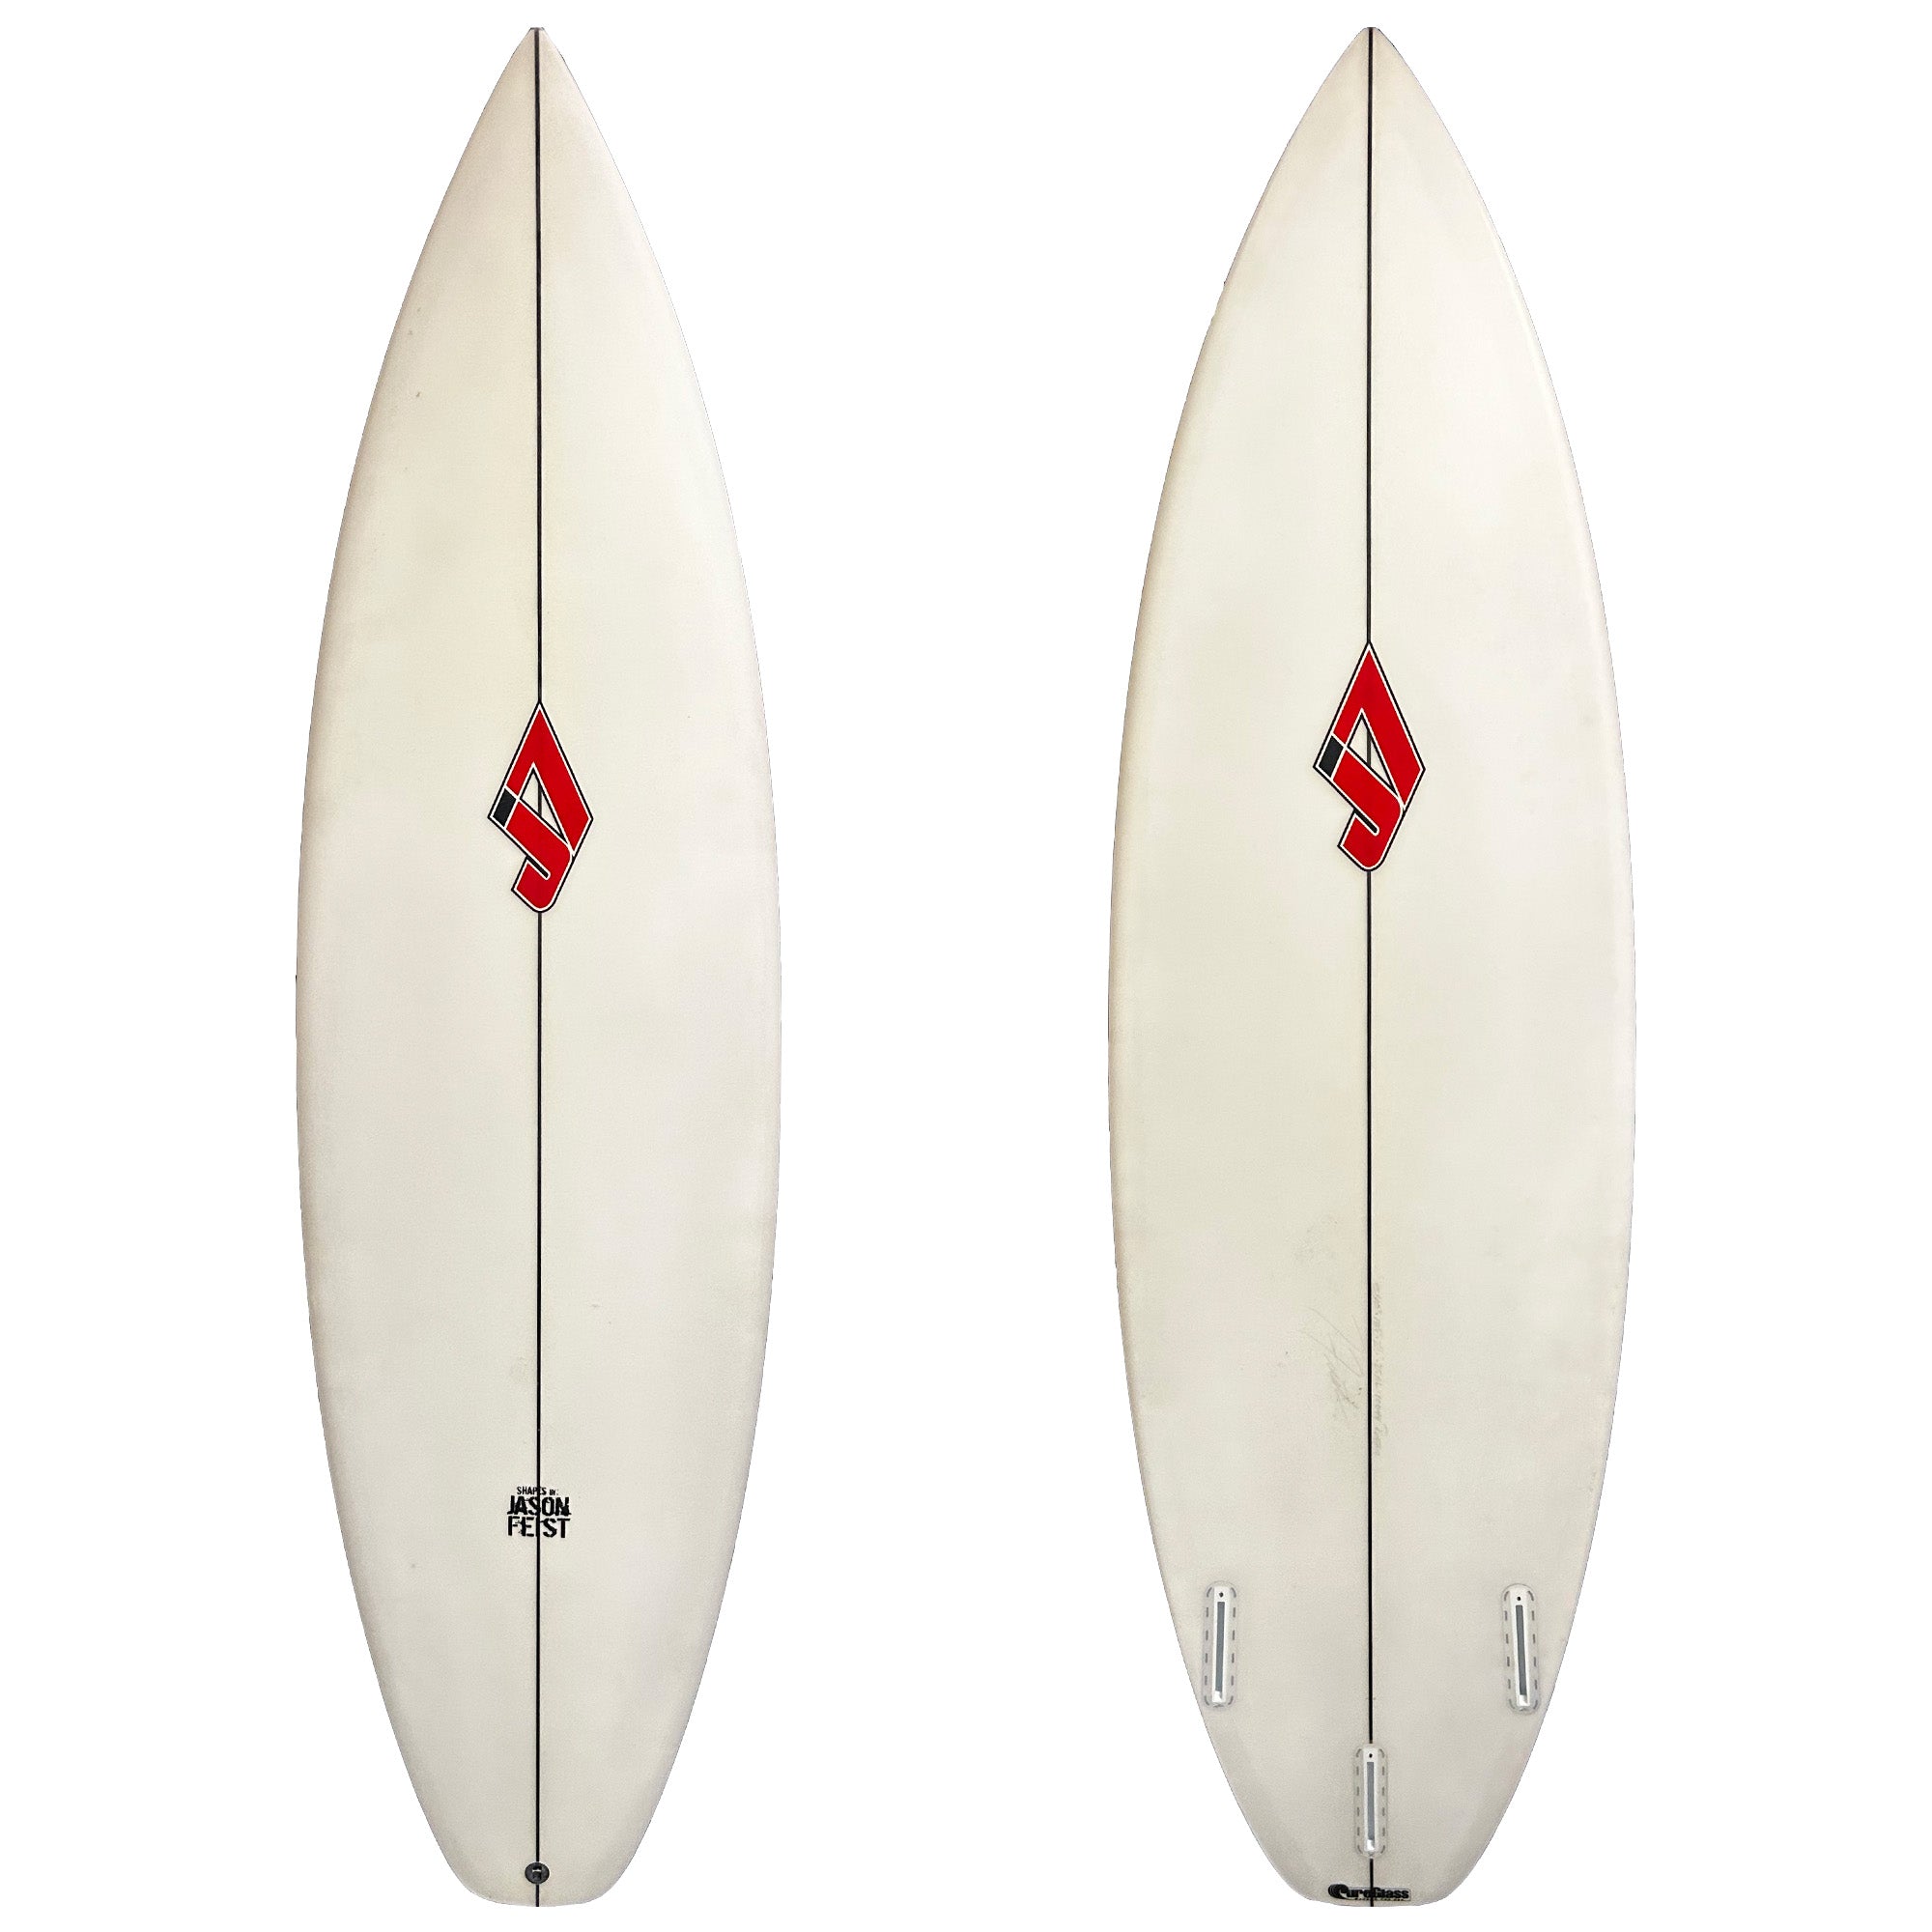 J7 5'10 Consignment Surfboard